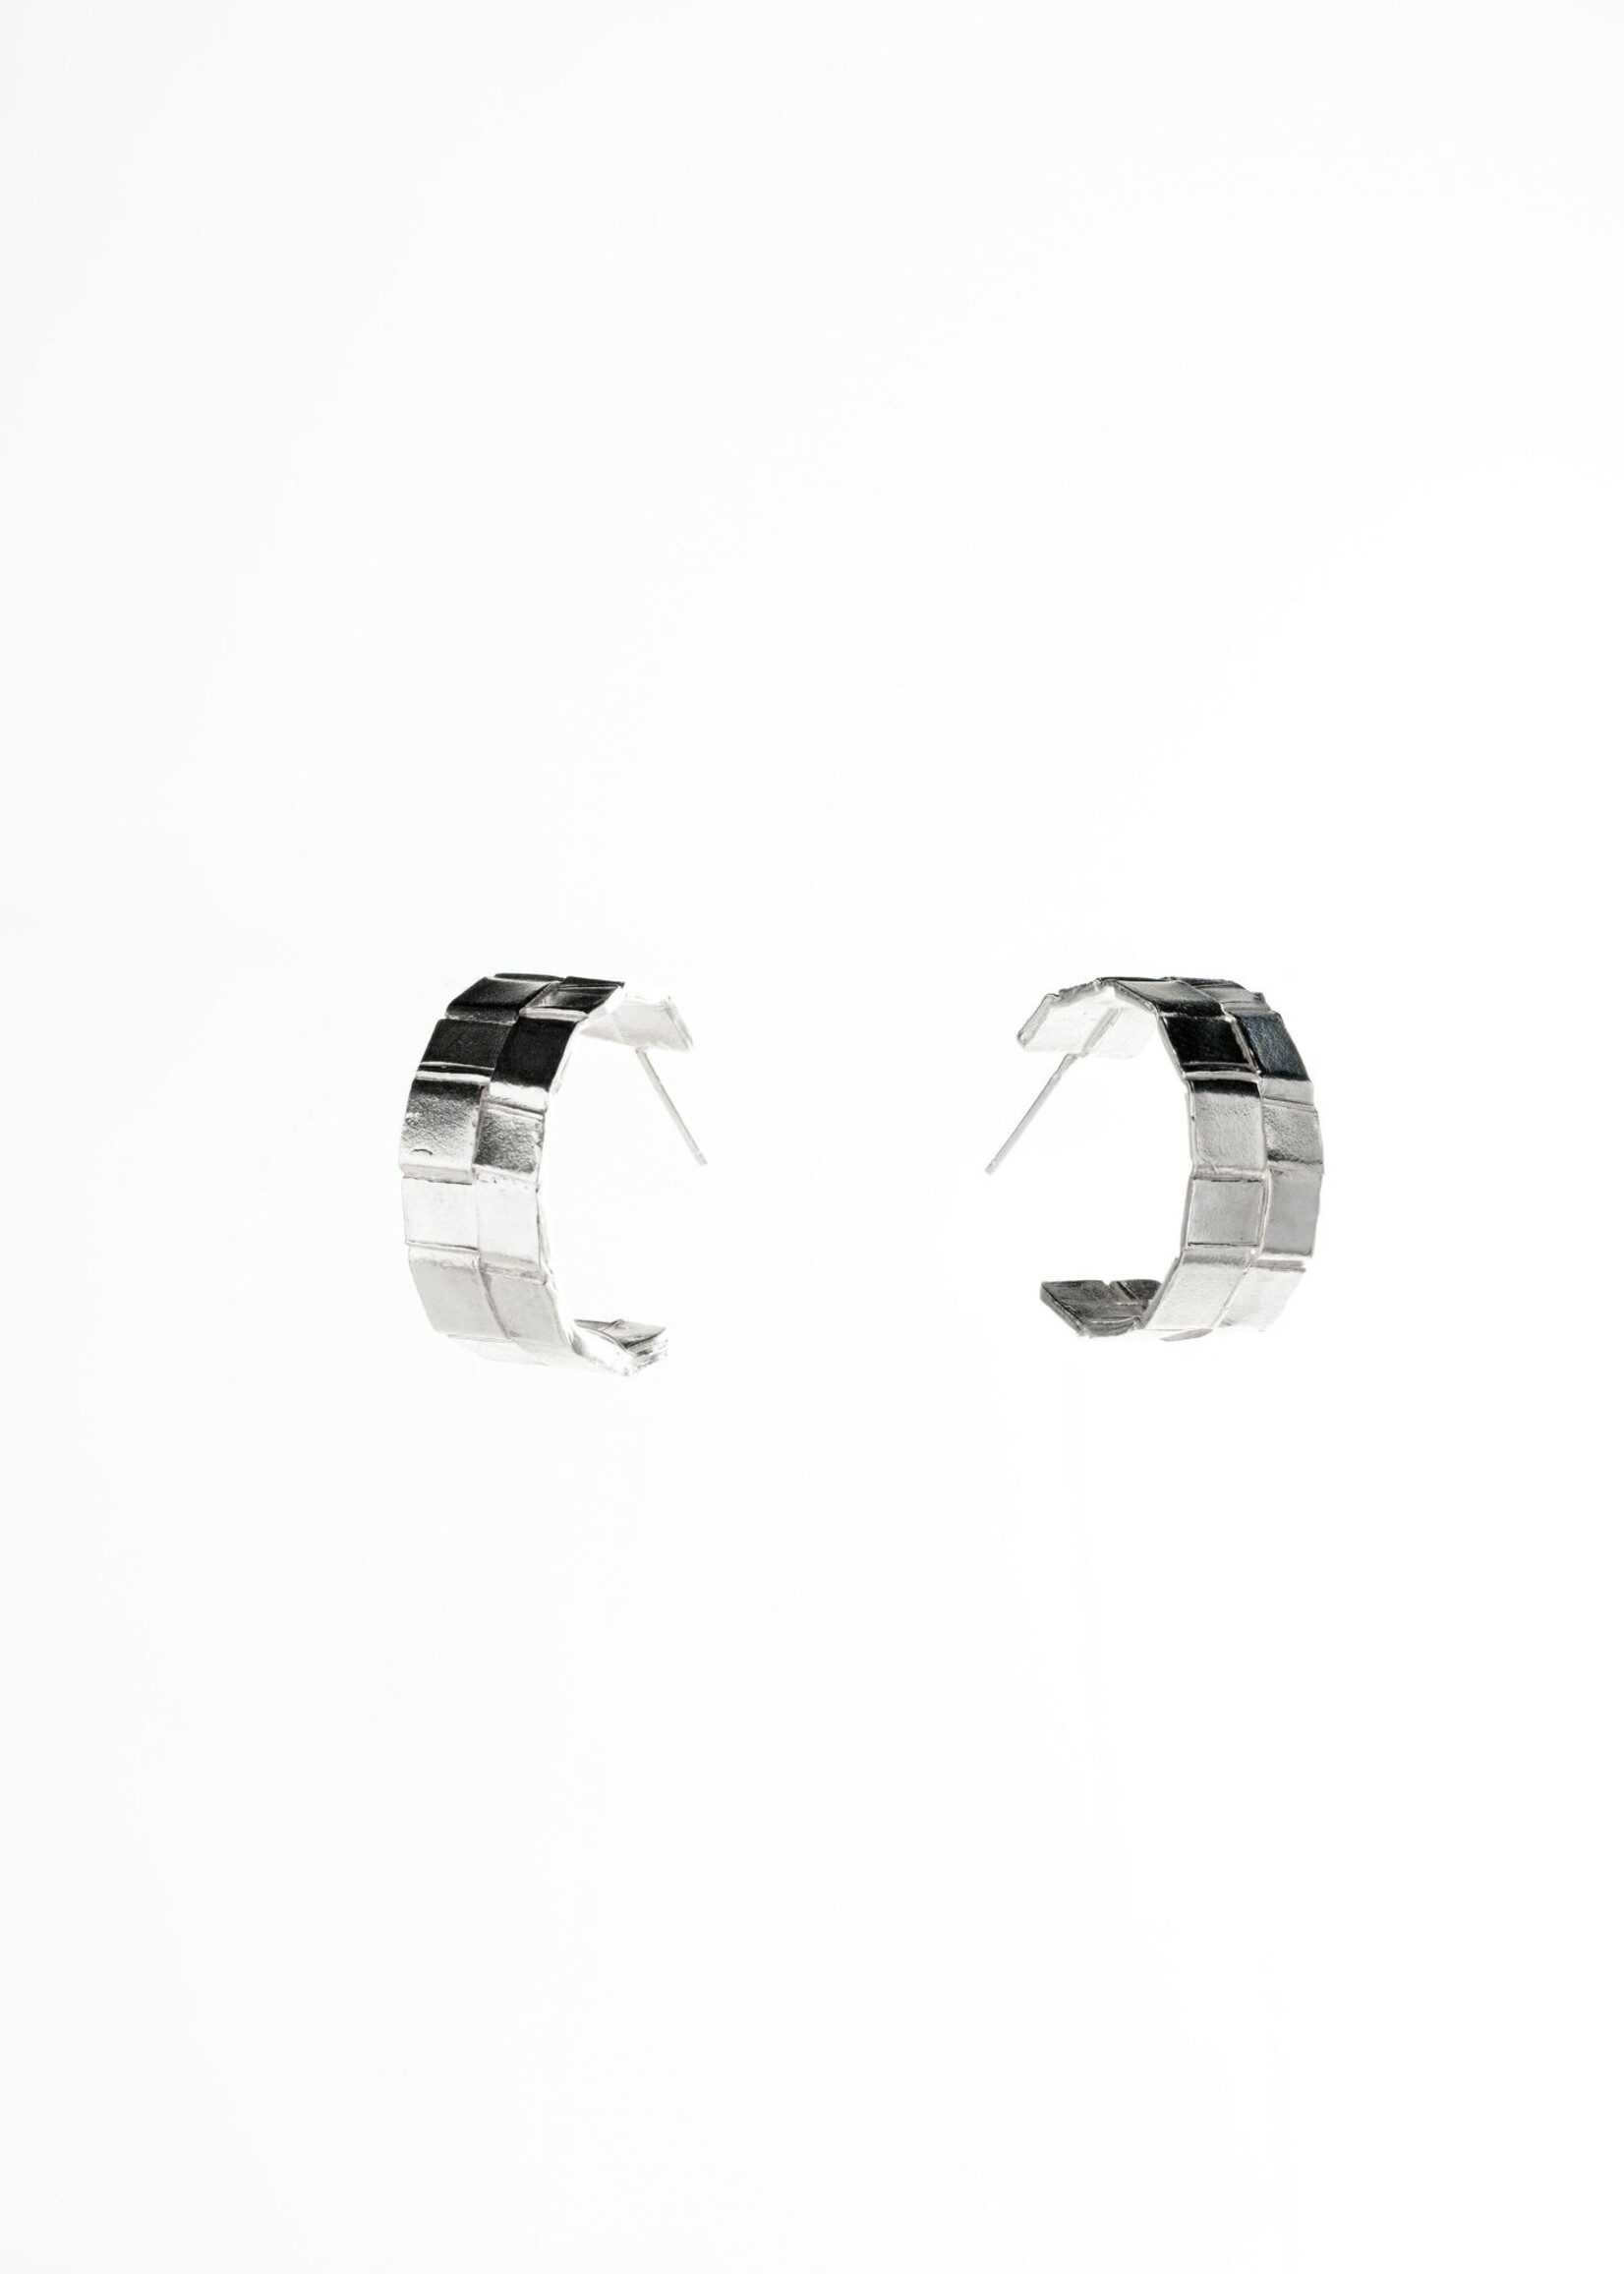 Sydnie Wainland Silver Double Woven Hoops